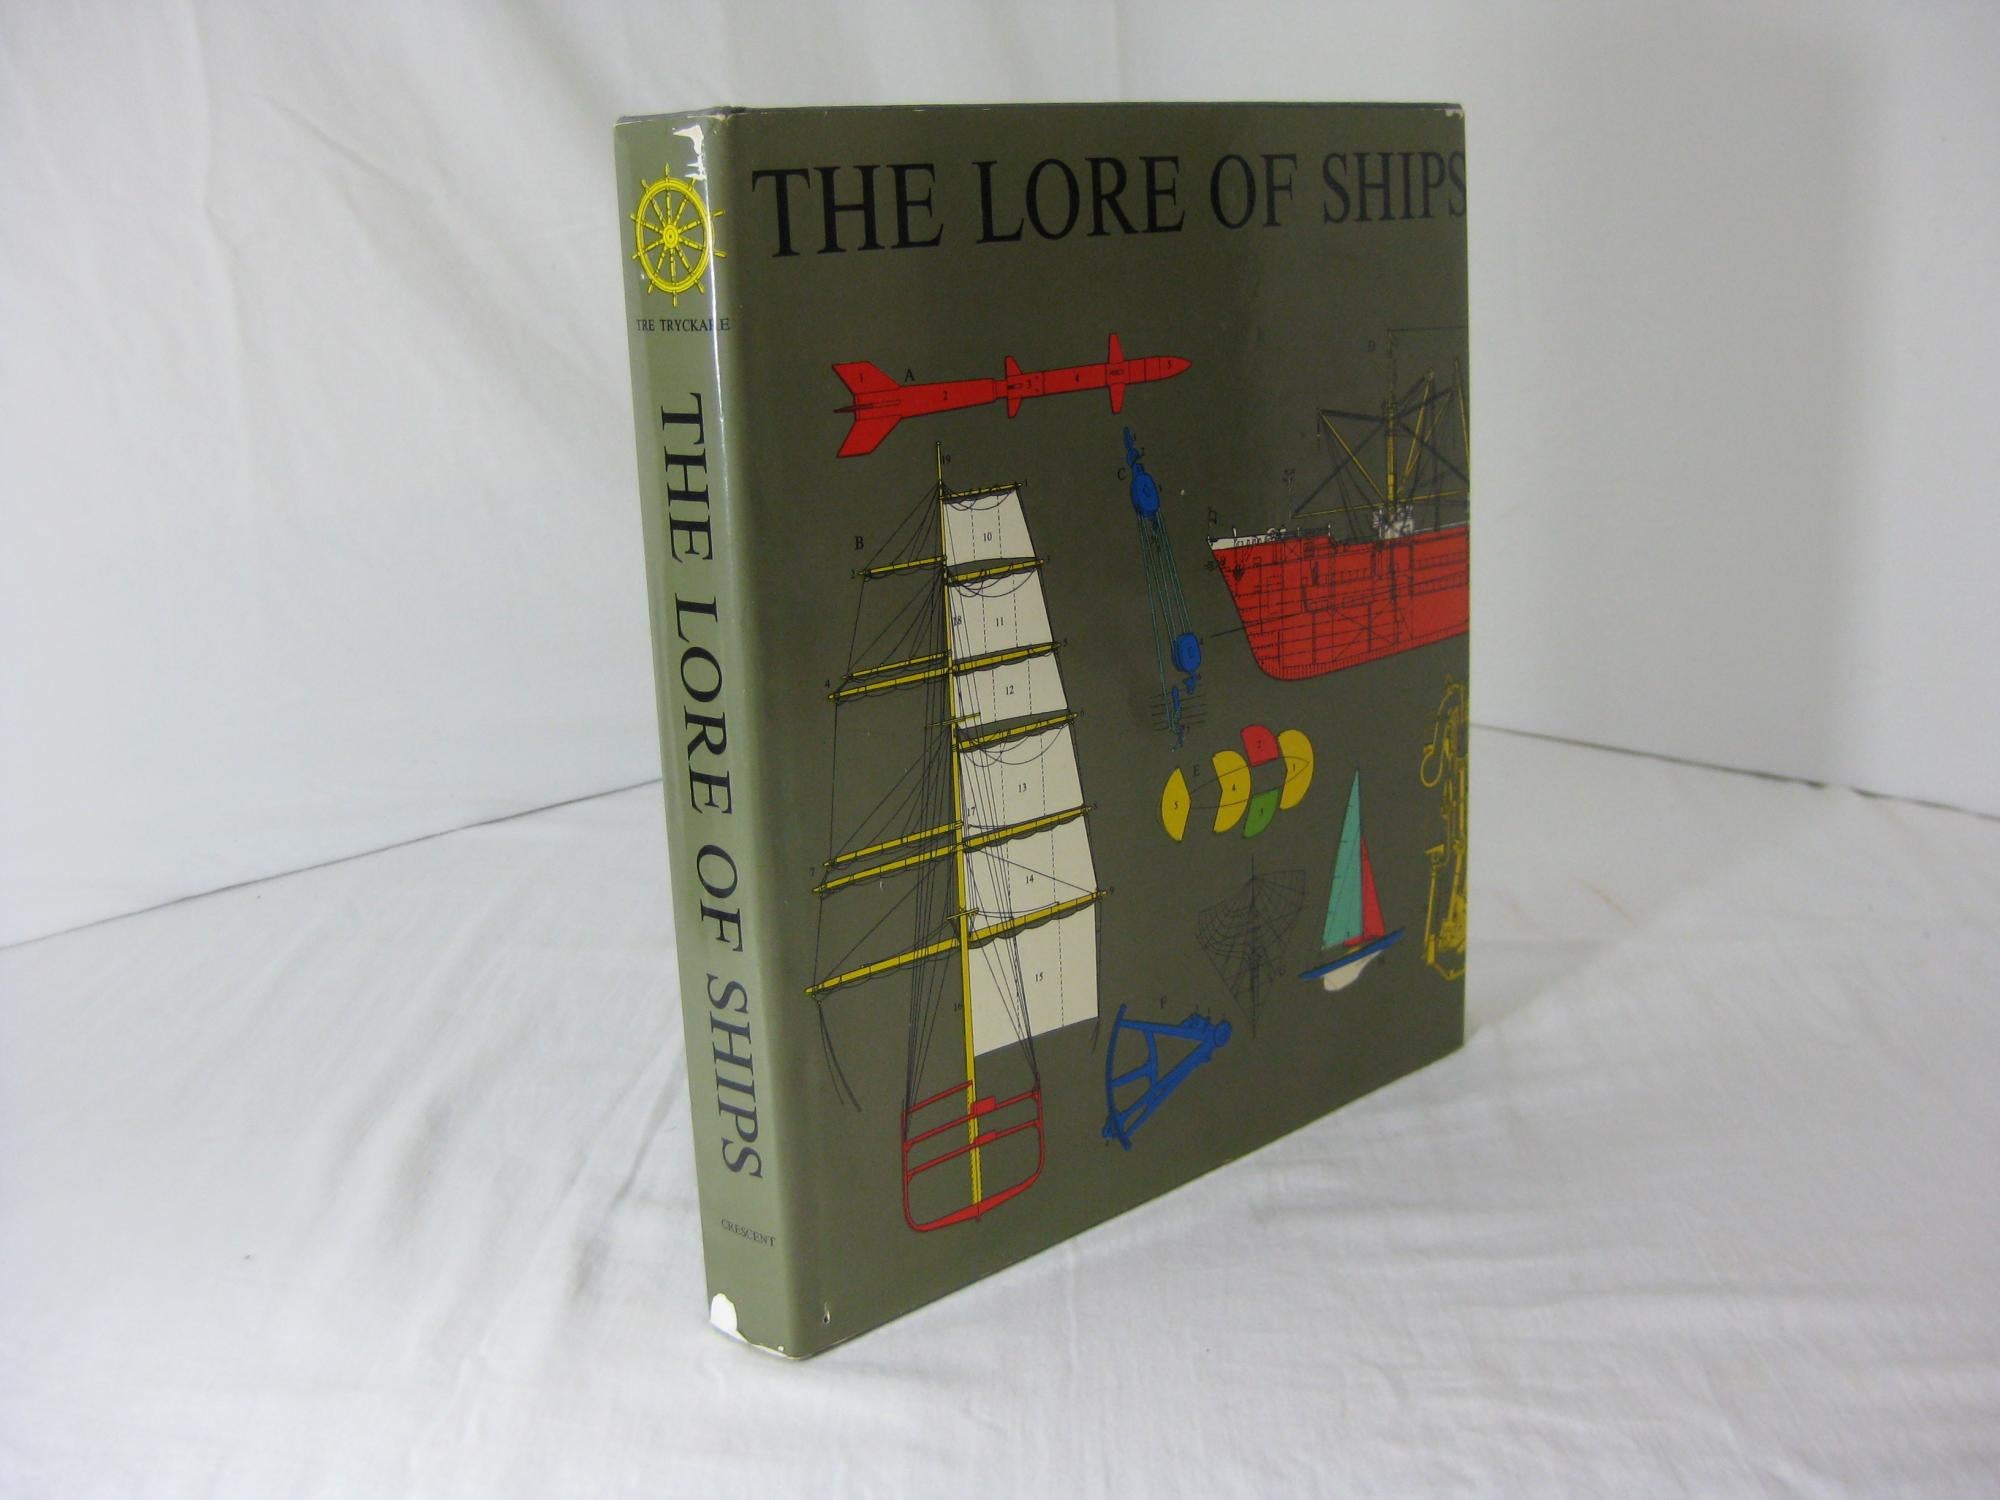 THE LORE OF SHIPS | Tre Tryckare | 2nd Edition